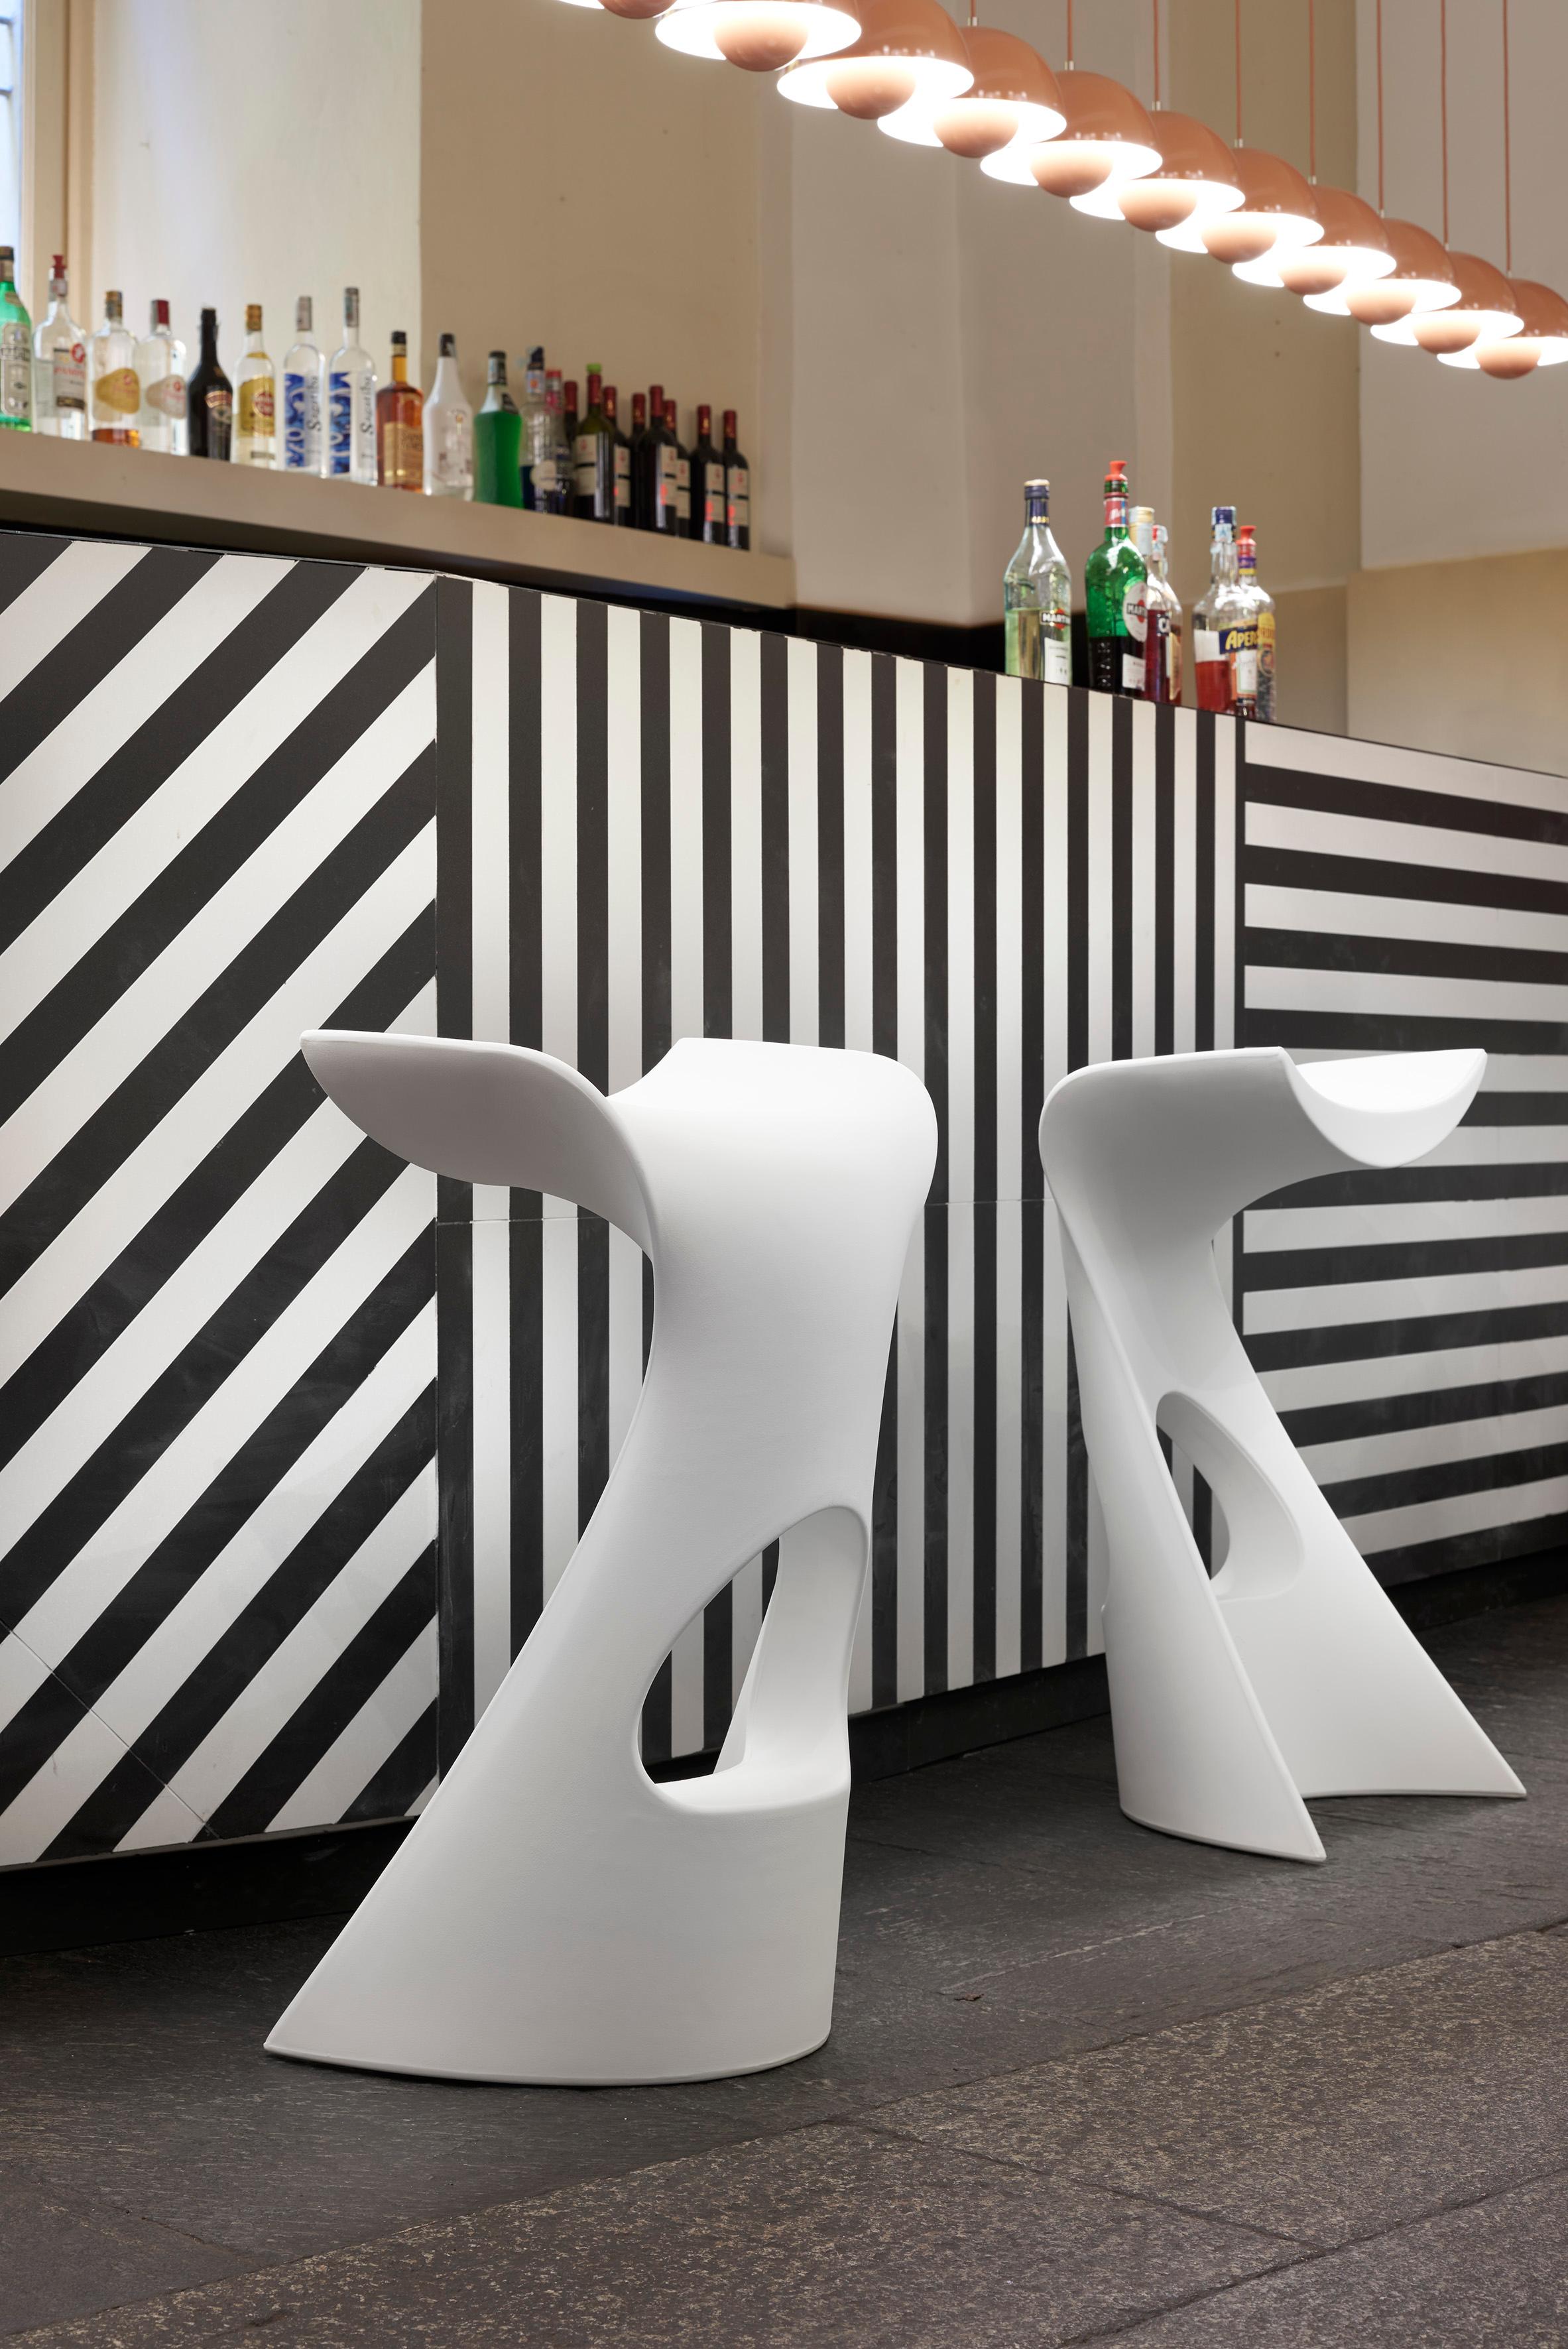 Jet Black Koncord High Stool by Karim Rashid
Dimensions: D 40 x W 43 x H 76 cm.
Materials: Polyethylene.
Weight: 5 kg.

Available in different color options. Available in standard, glossy or matte lacquered finishes. Also available in a